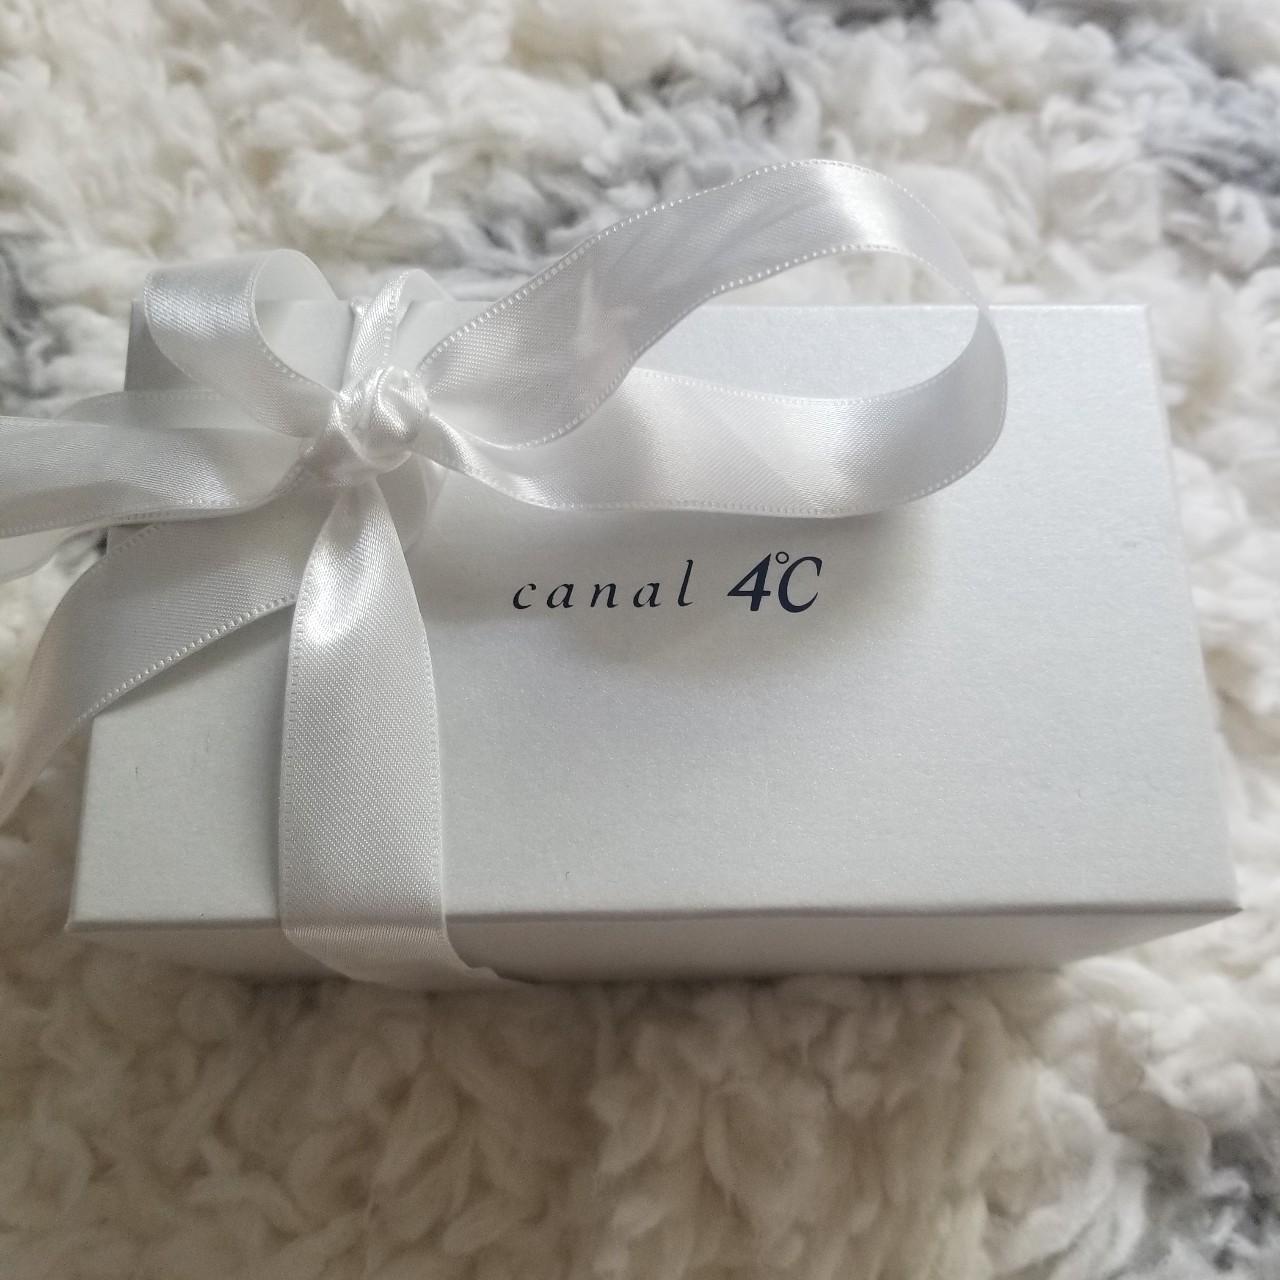 **BRAND NEW** Canal 4c is a jewelry brand from...